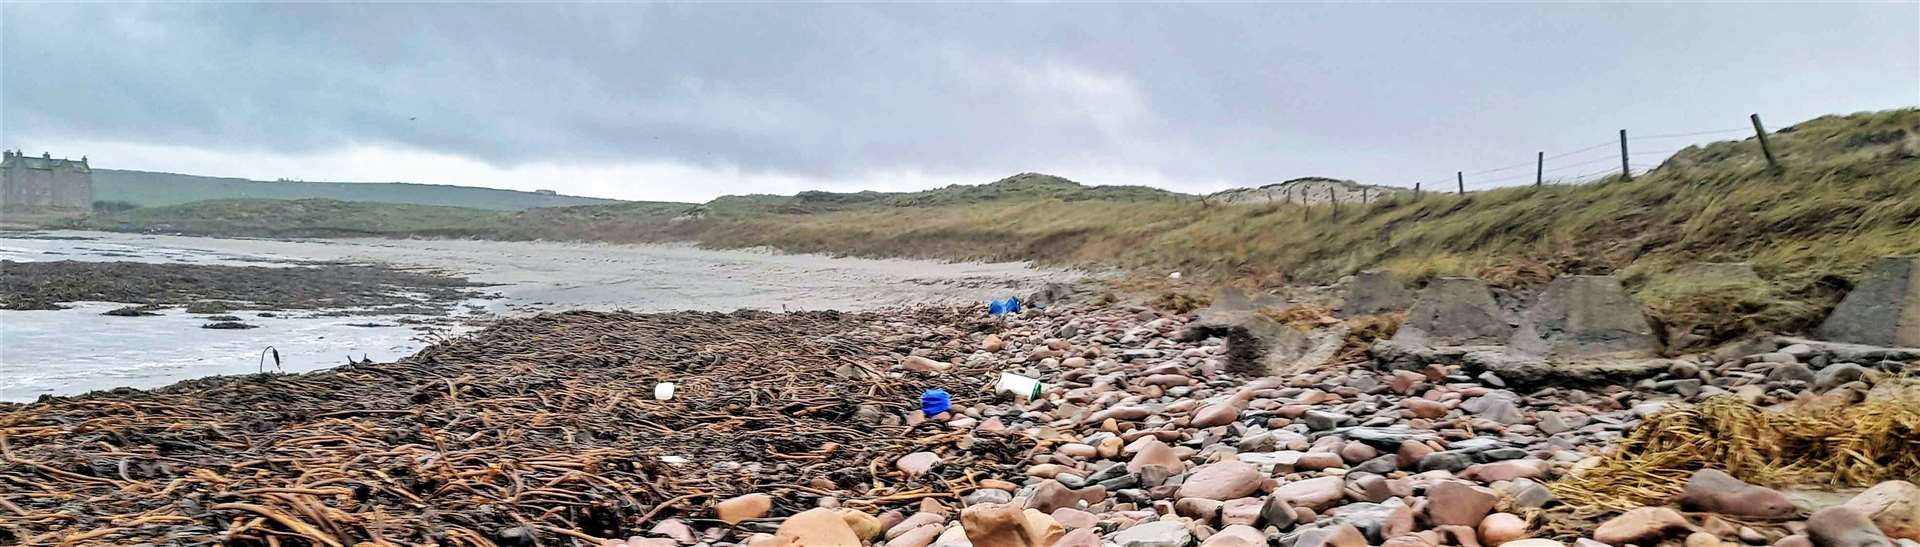 Freswick beach was visited by Dorcas and Allan Sinclair who founded Caithness Beach Cleans.